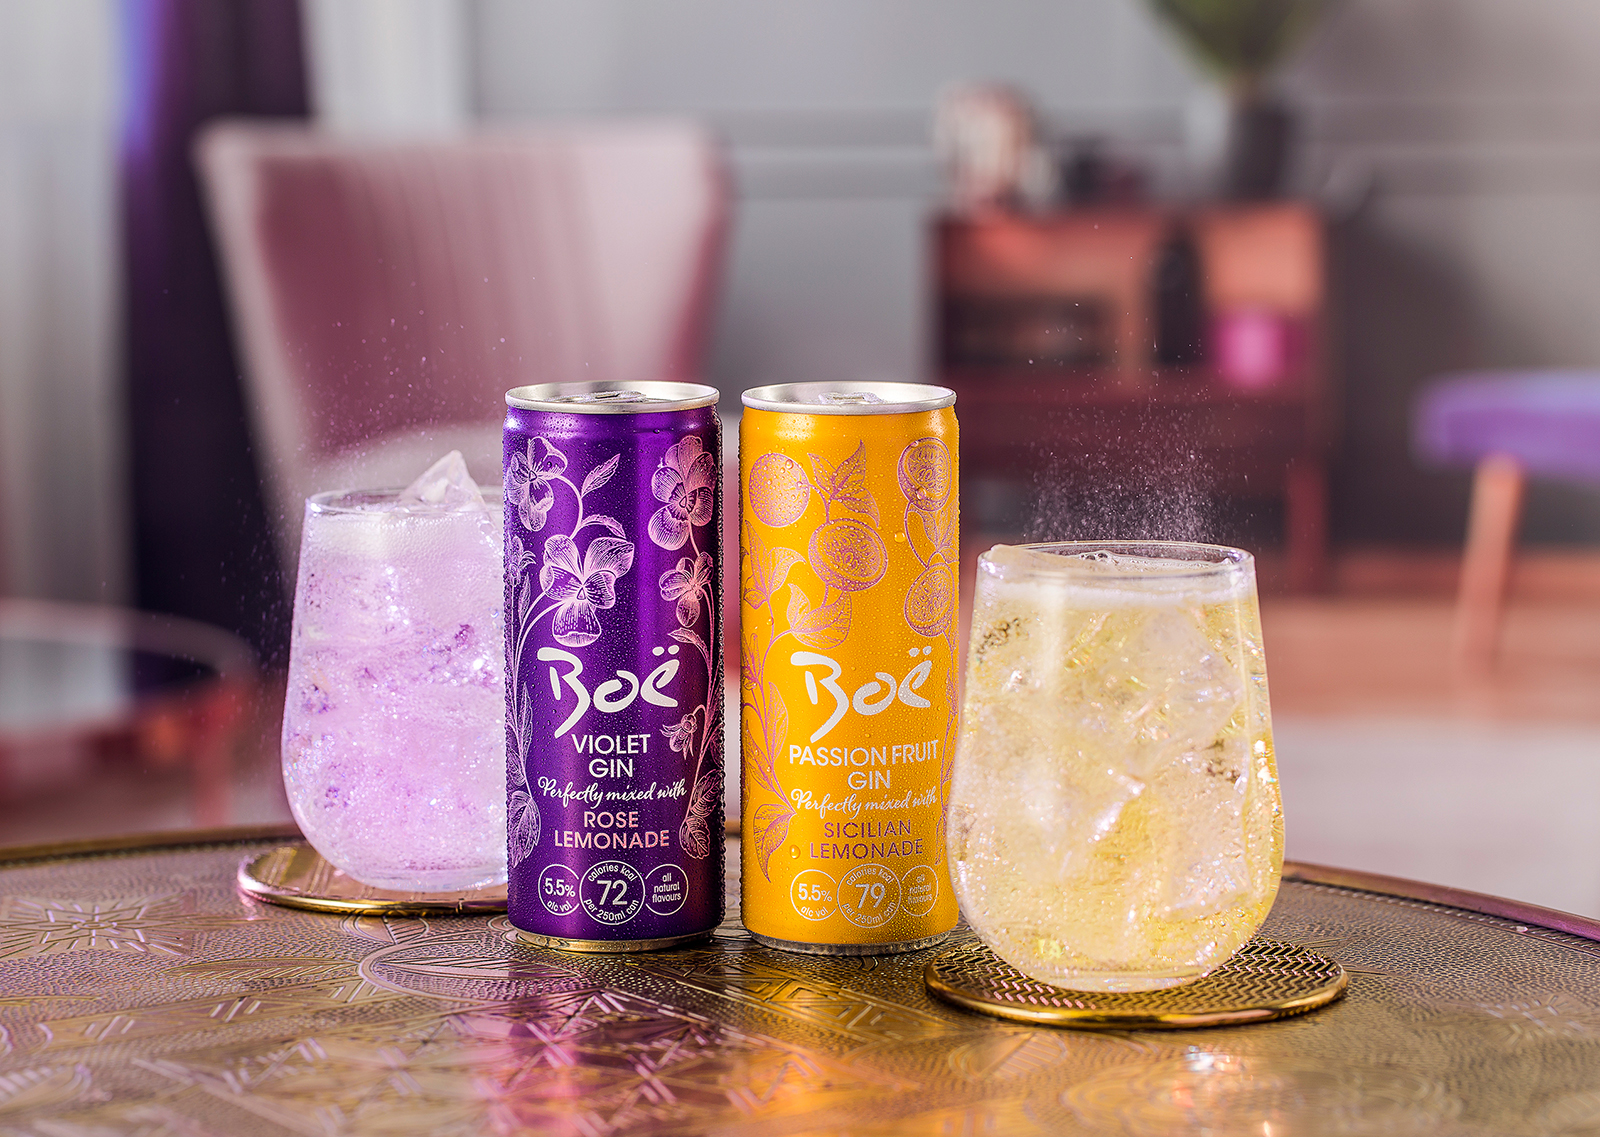 The new gin and lemonade cans from Boë Gin, featuring its Violet Gin and Rose Lemonade and its Passionfruit Gin and Sicilian Lemonade